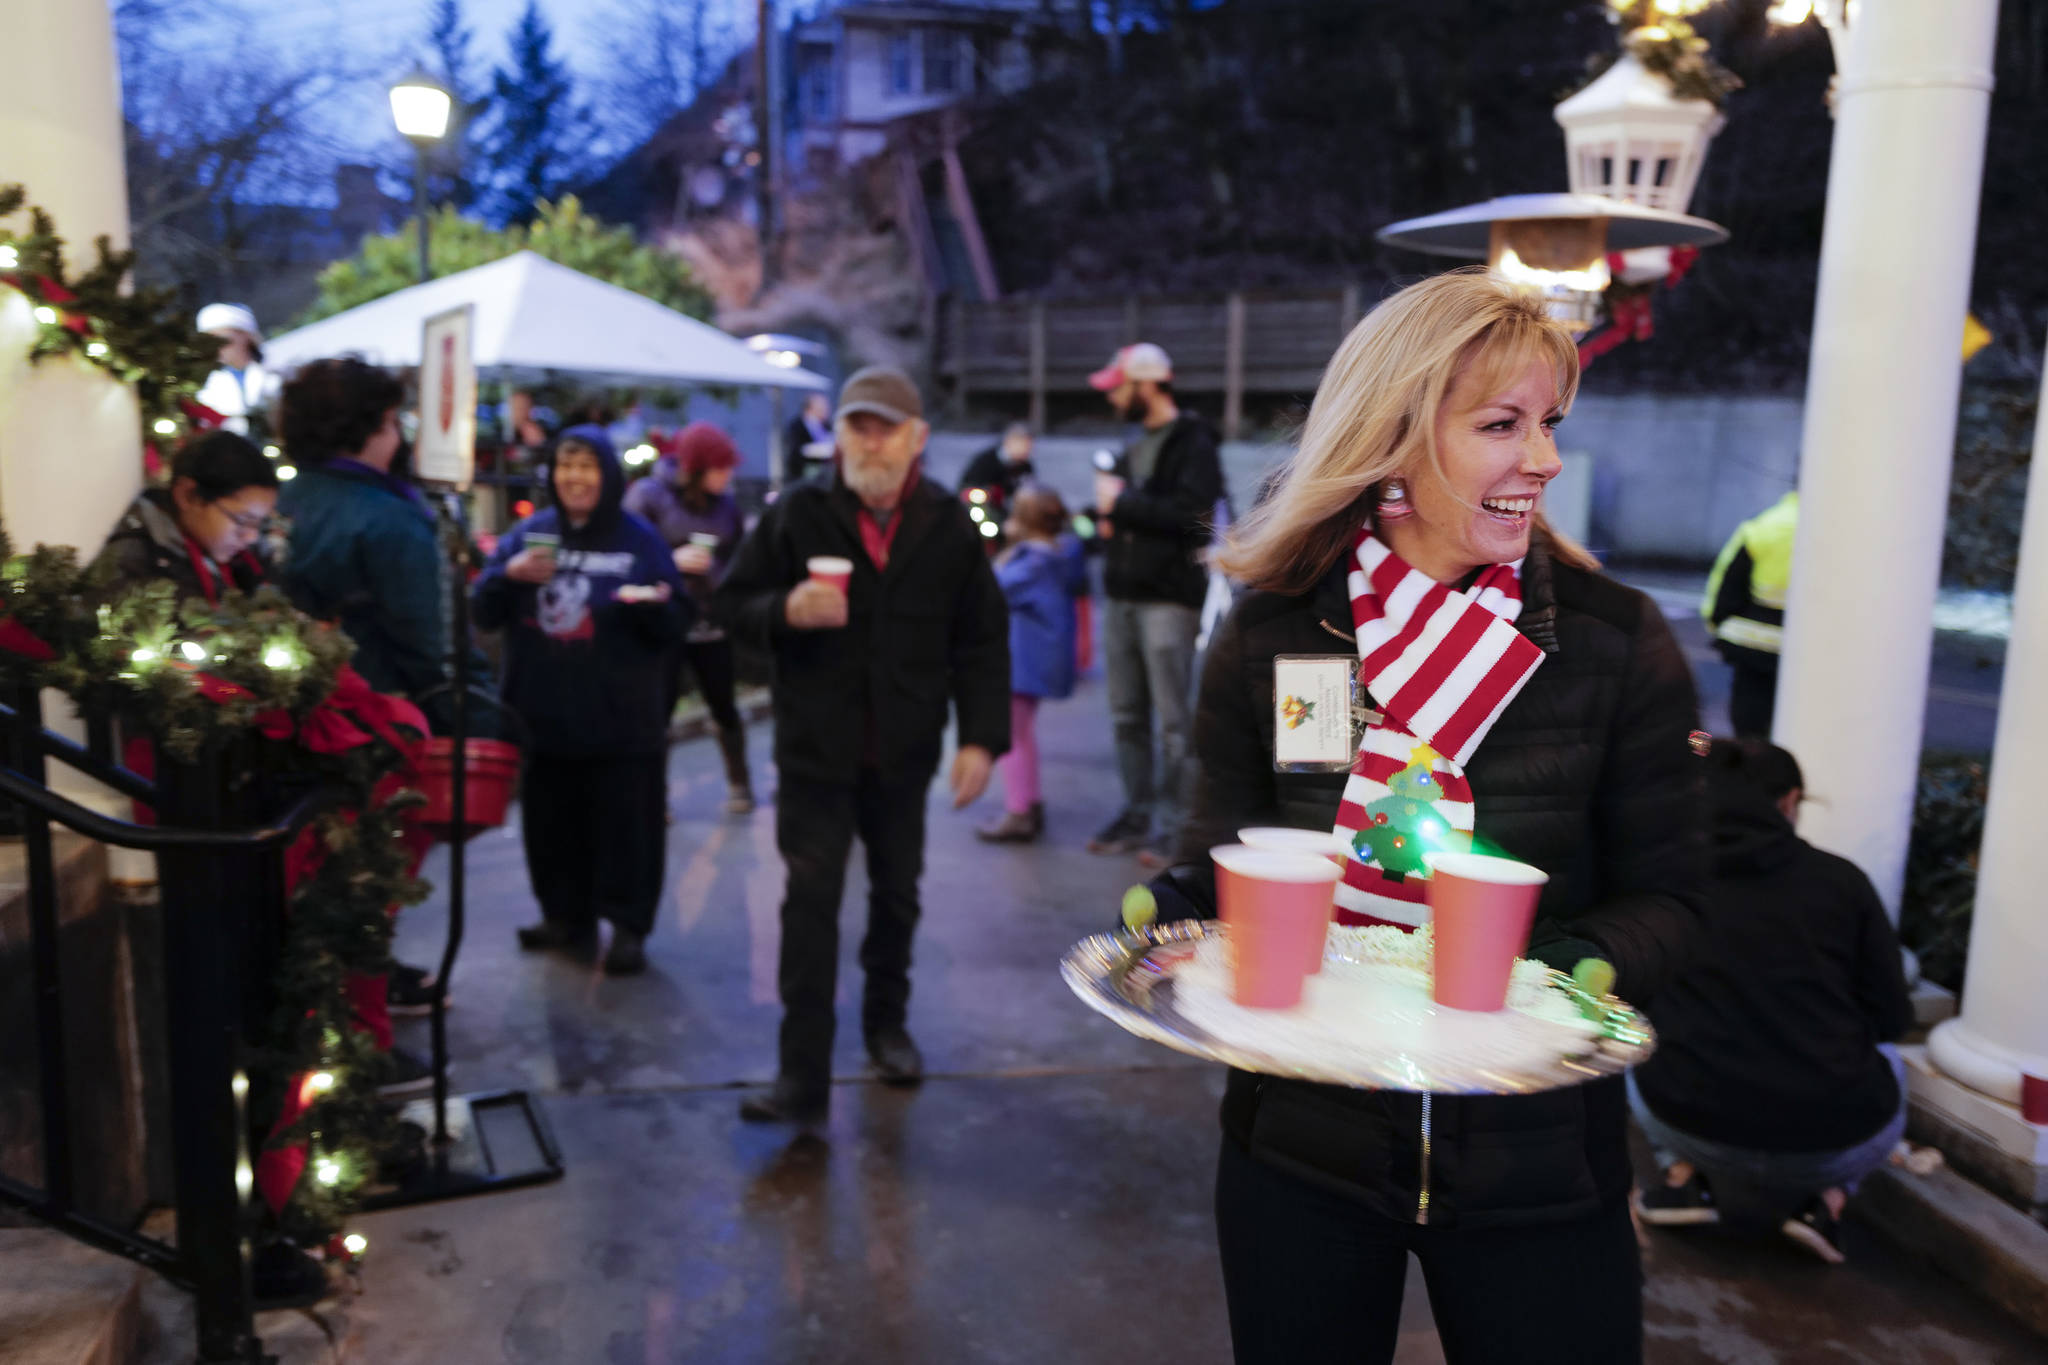 Amanda Price, Commissioner of the Department of Public Safety, serves hot cider outside during the Governor’s Open House on Tuesday, Dec. 10, 2019. (Michael Penn | Juneau Empire)